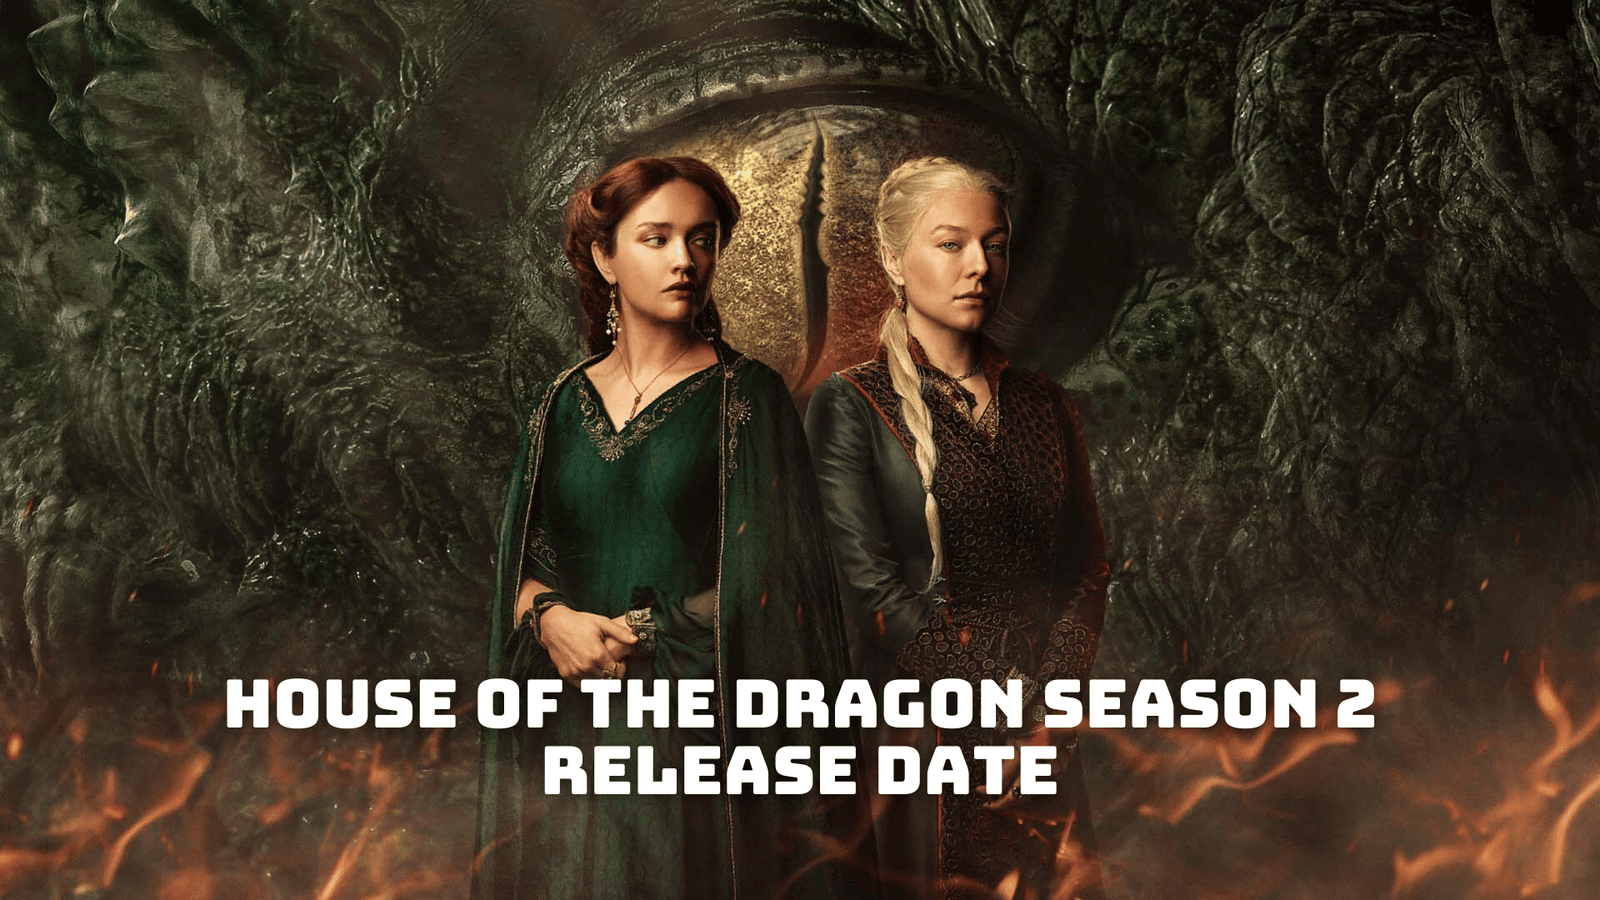 House of the Dragon Season 2 Release Date, Trailer